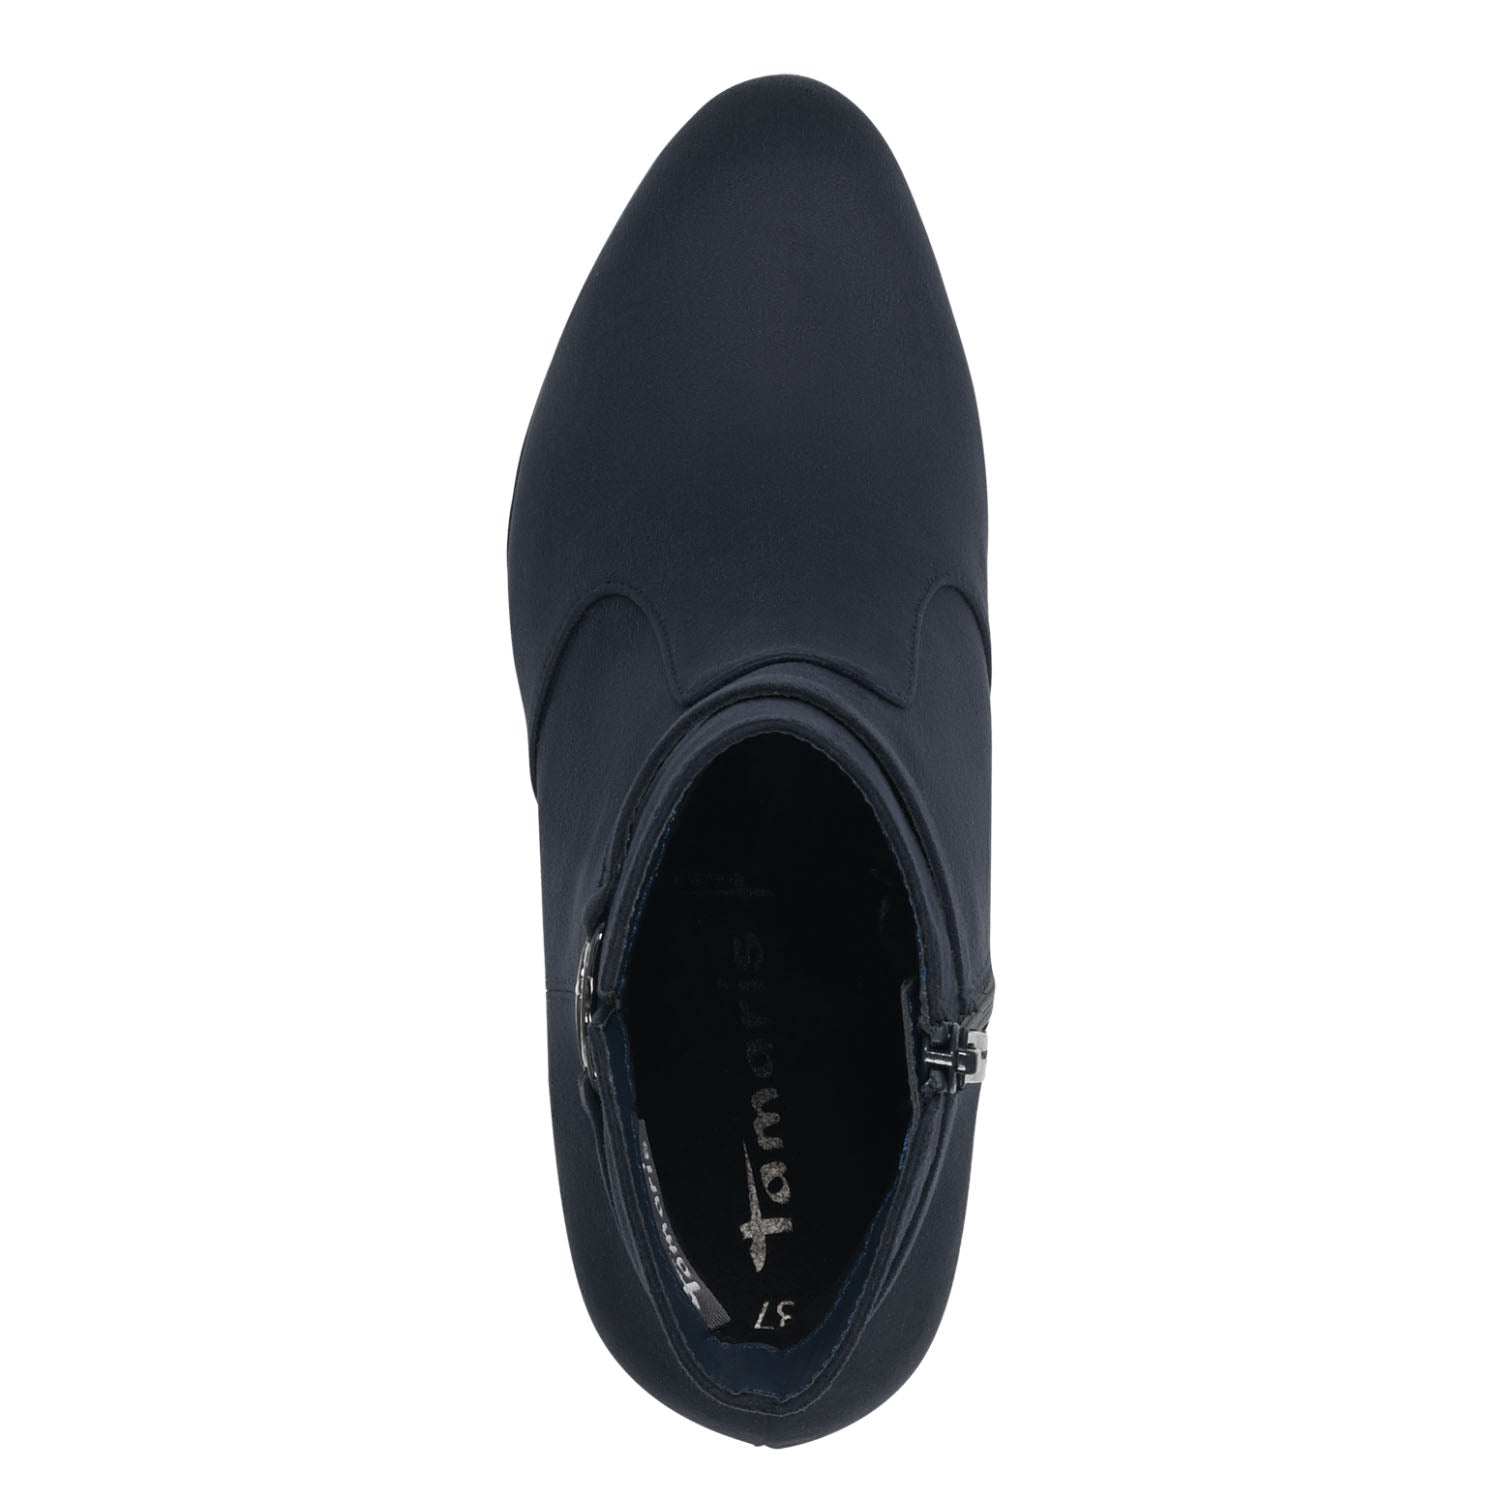 Top view showcasing the wrap-around strap and dark grey metal detail of the Tamaris Dressy Navy Thick Heel Boots.